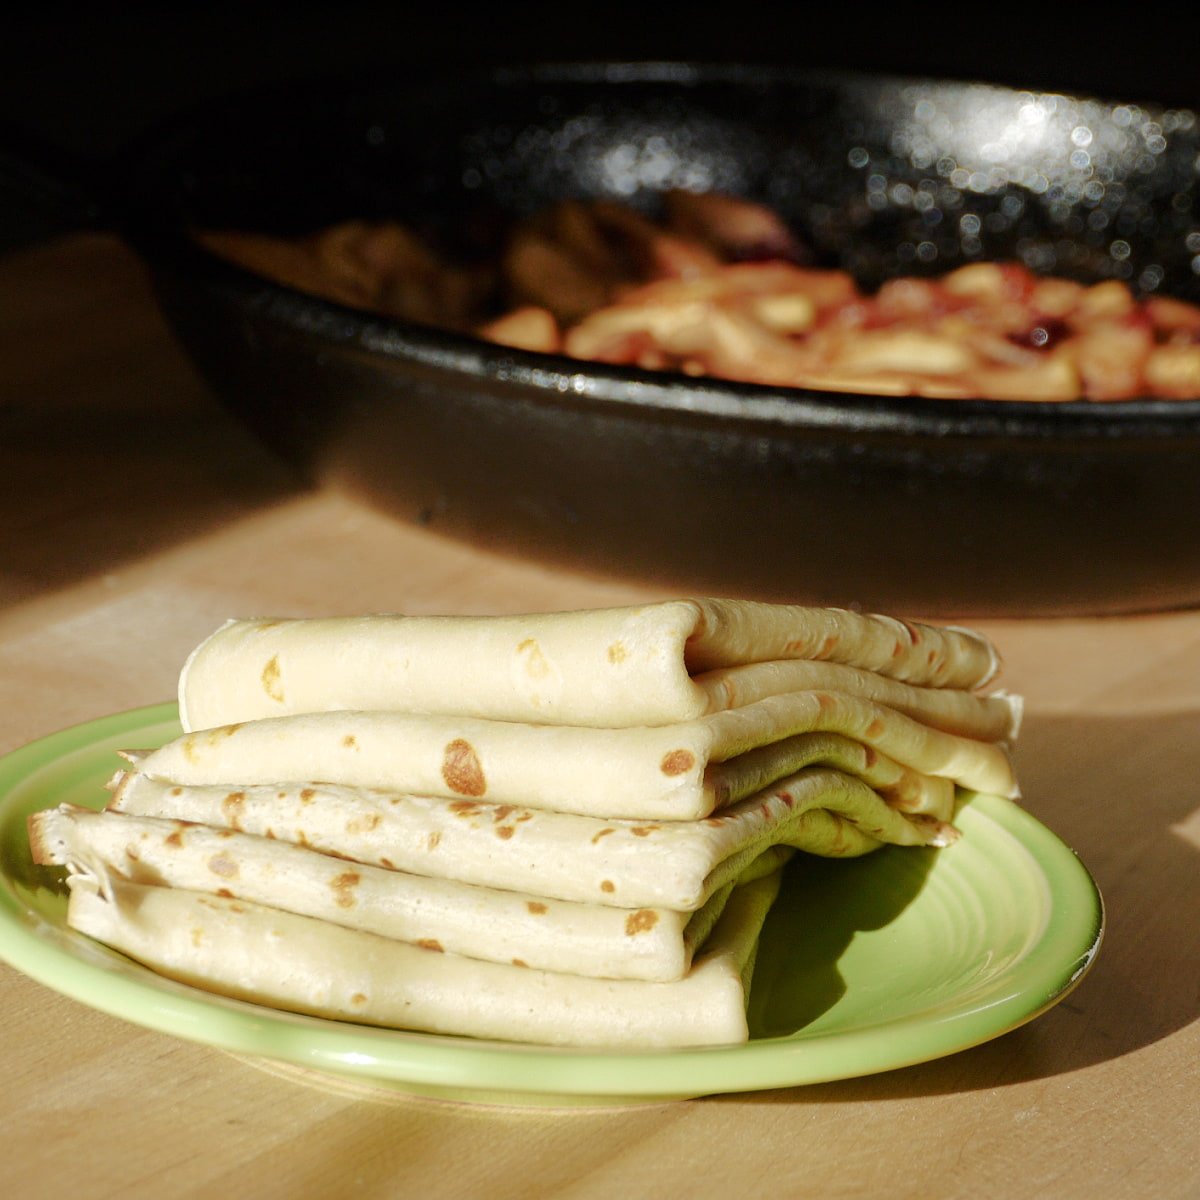 Five crepes folded in quarters and stacked on a small plate.